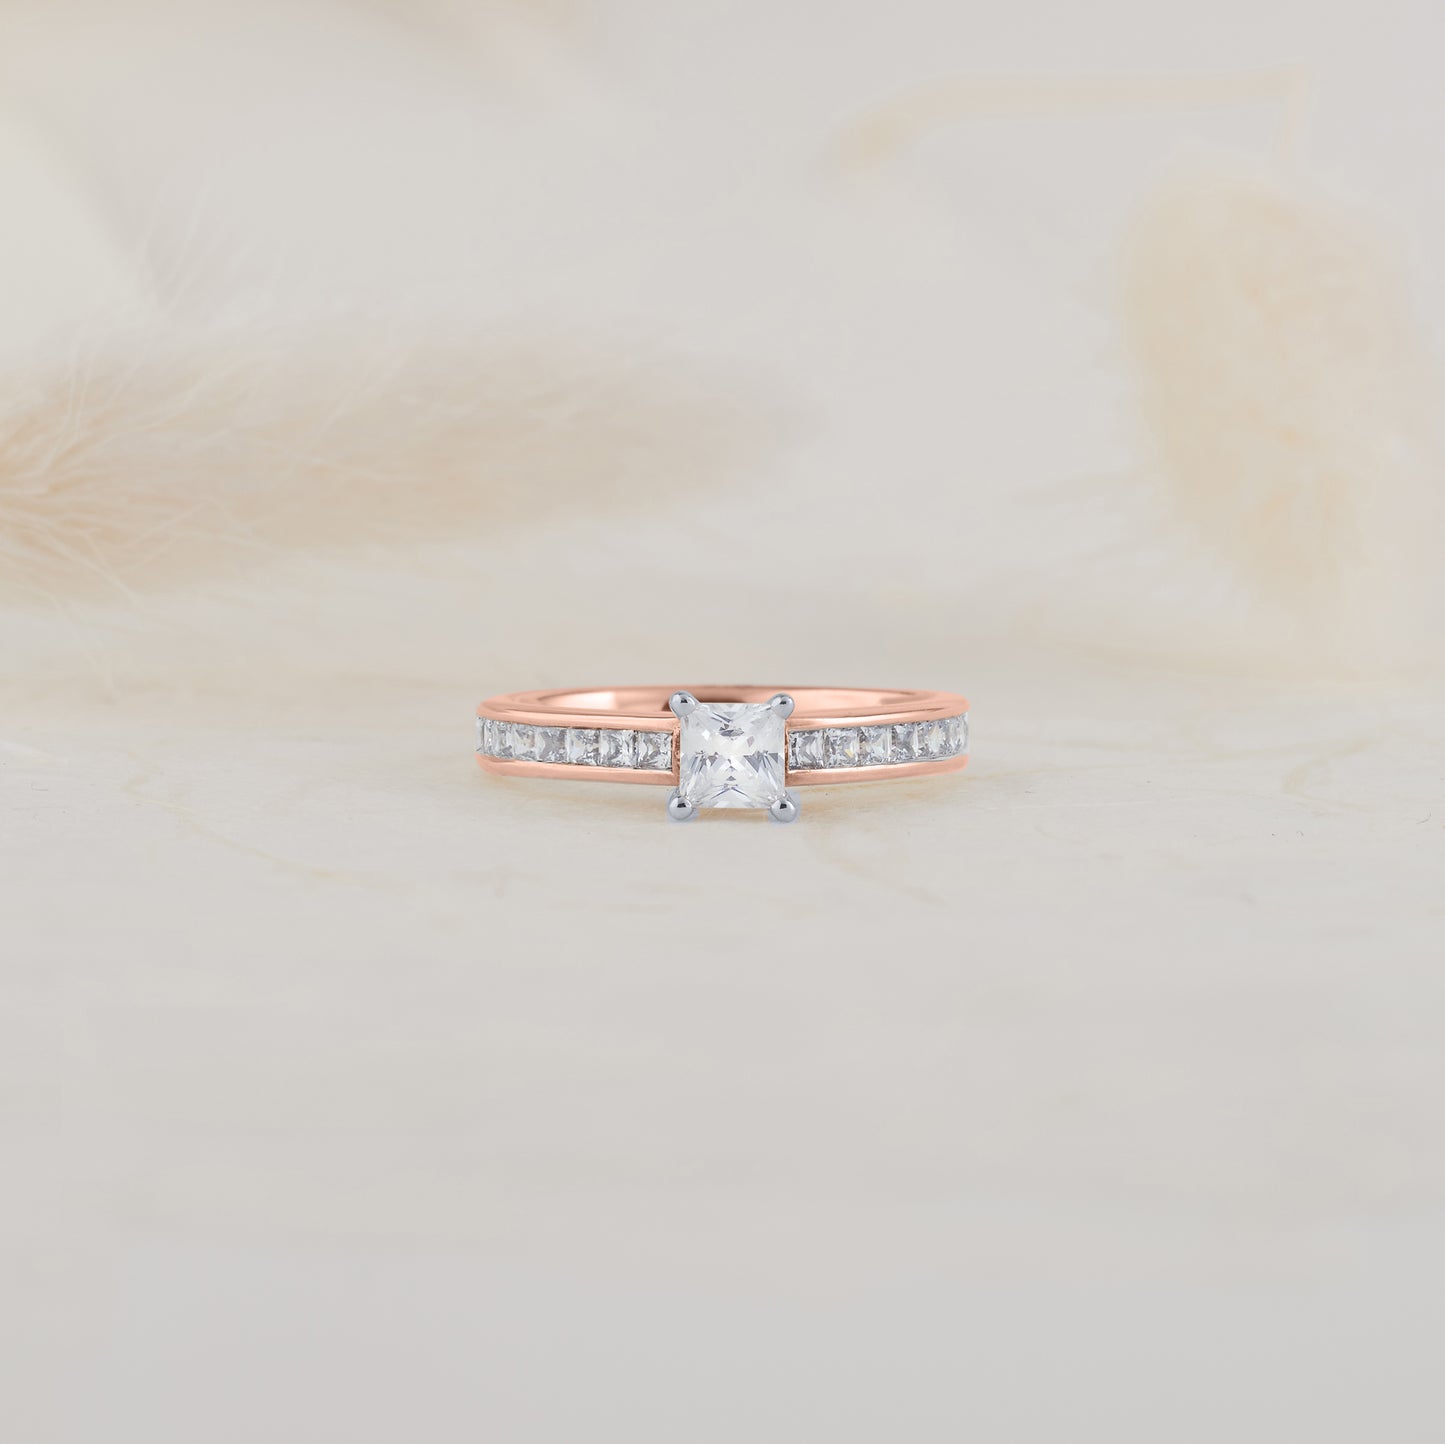 18K Rose Gold and Platinum Princess Cut Diamond Solitaire with Shoulder Accents Engagement Ring 1.0tdw